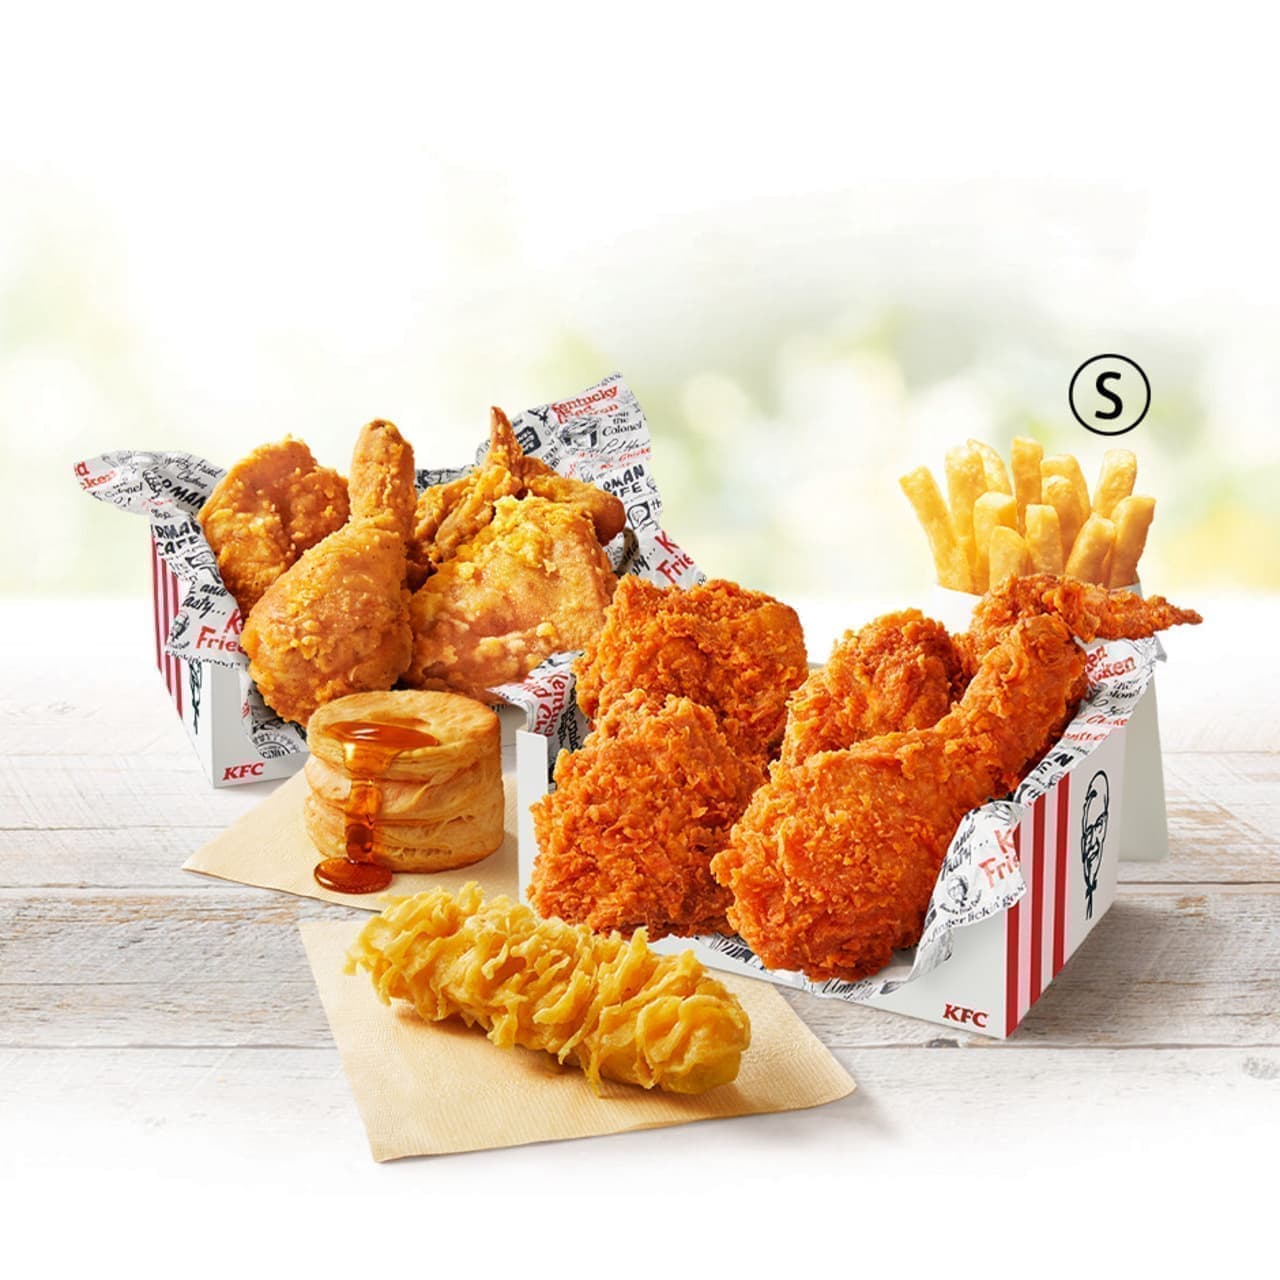 KFC "Eating Contest 8 Piece Pack